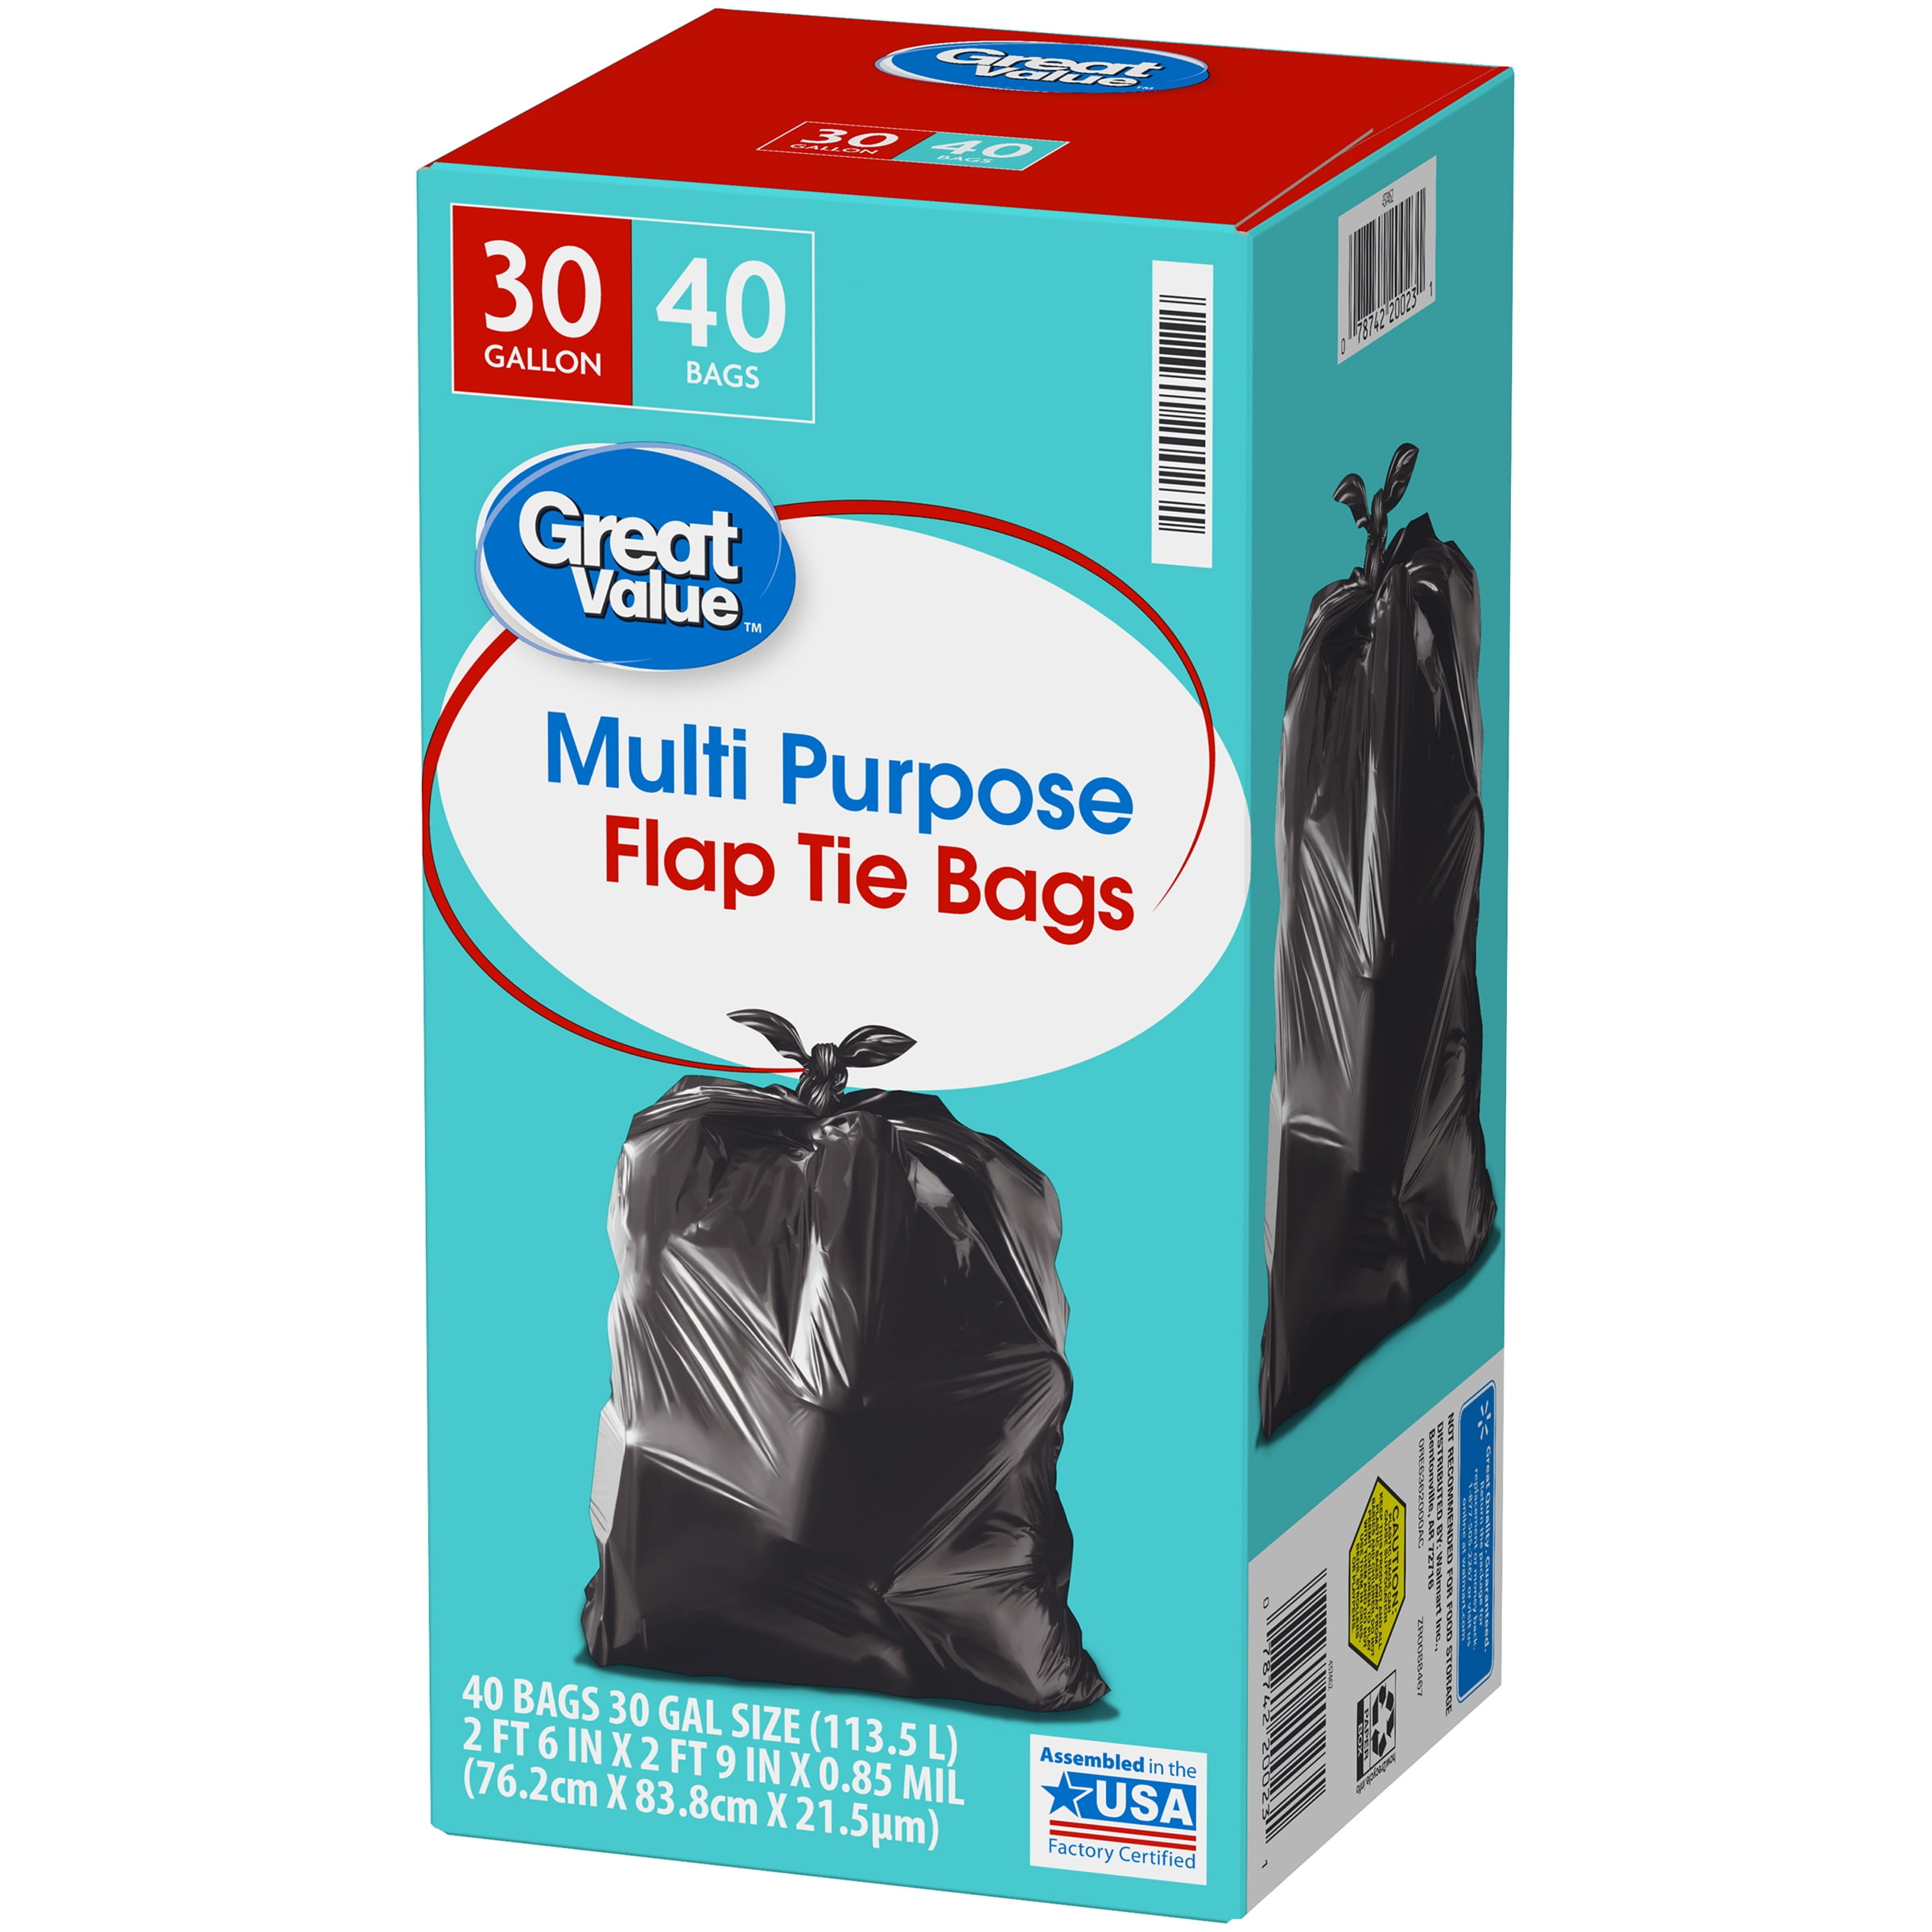 Great Value Drawstring Bags, Unscented, Multi-Purpose, 30 Gallon - 40 bags